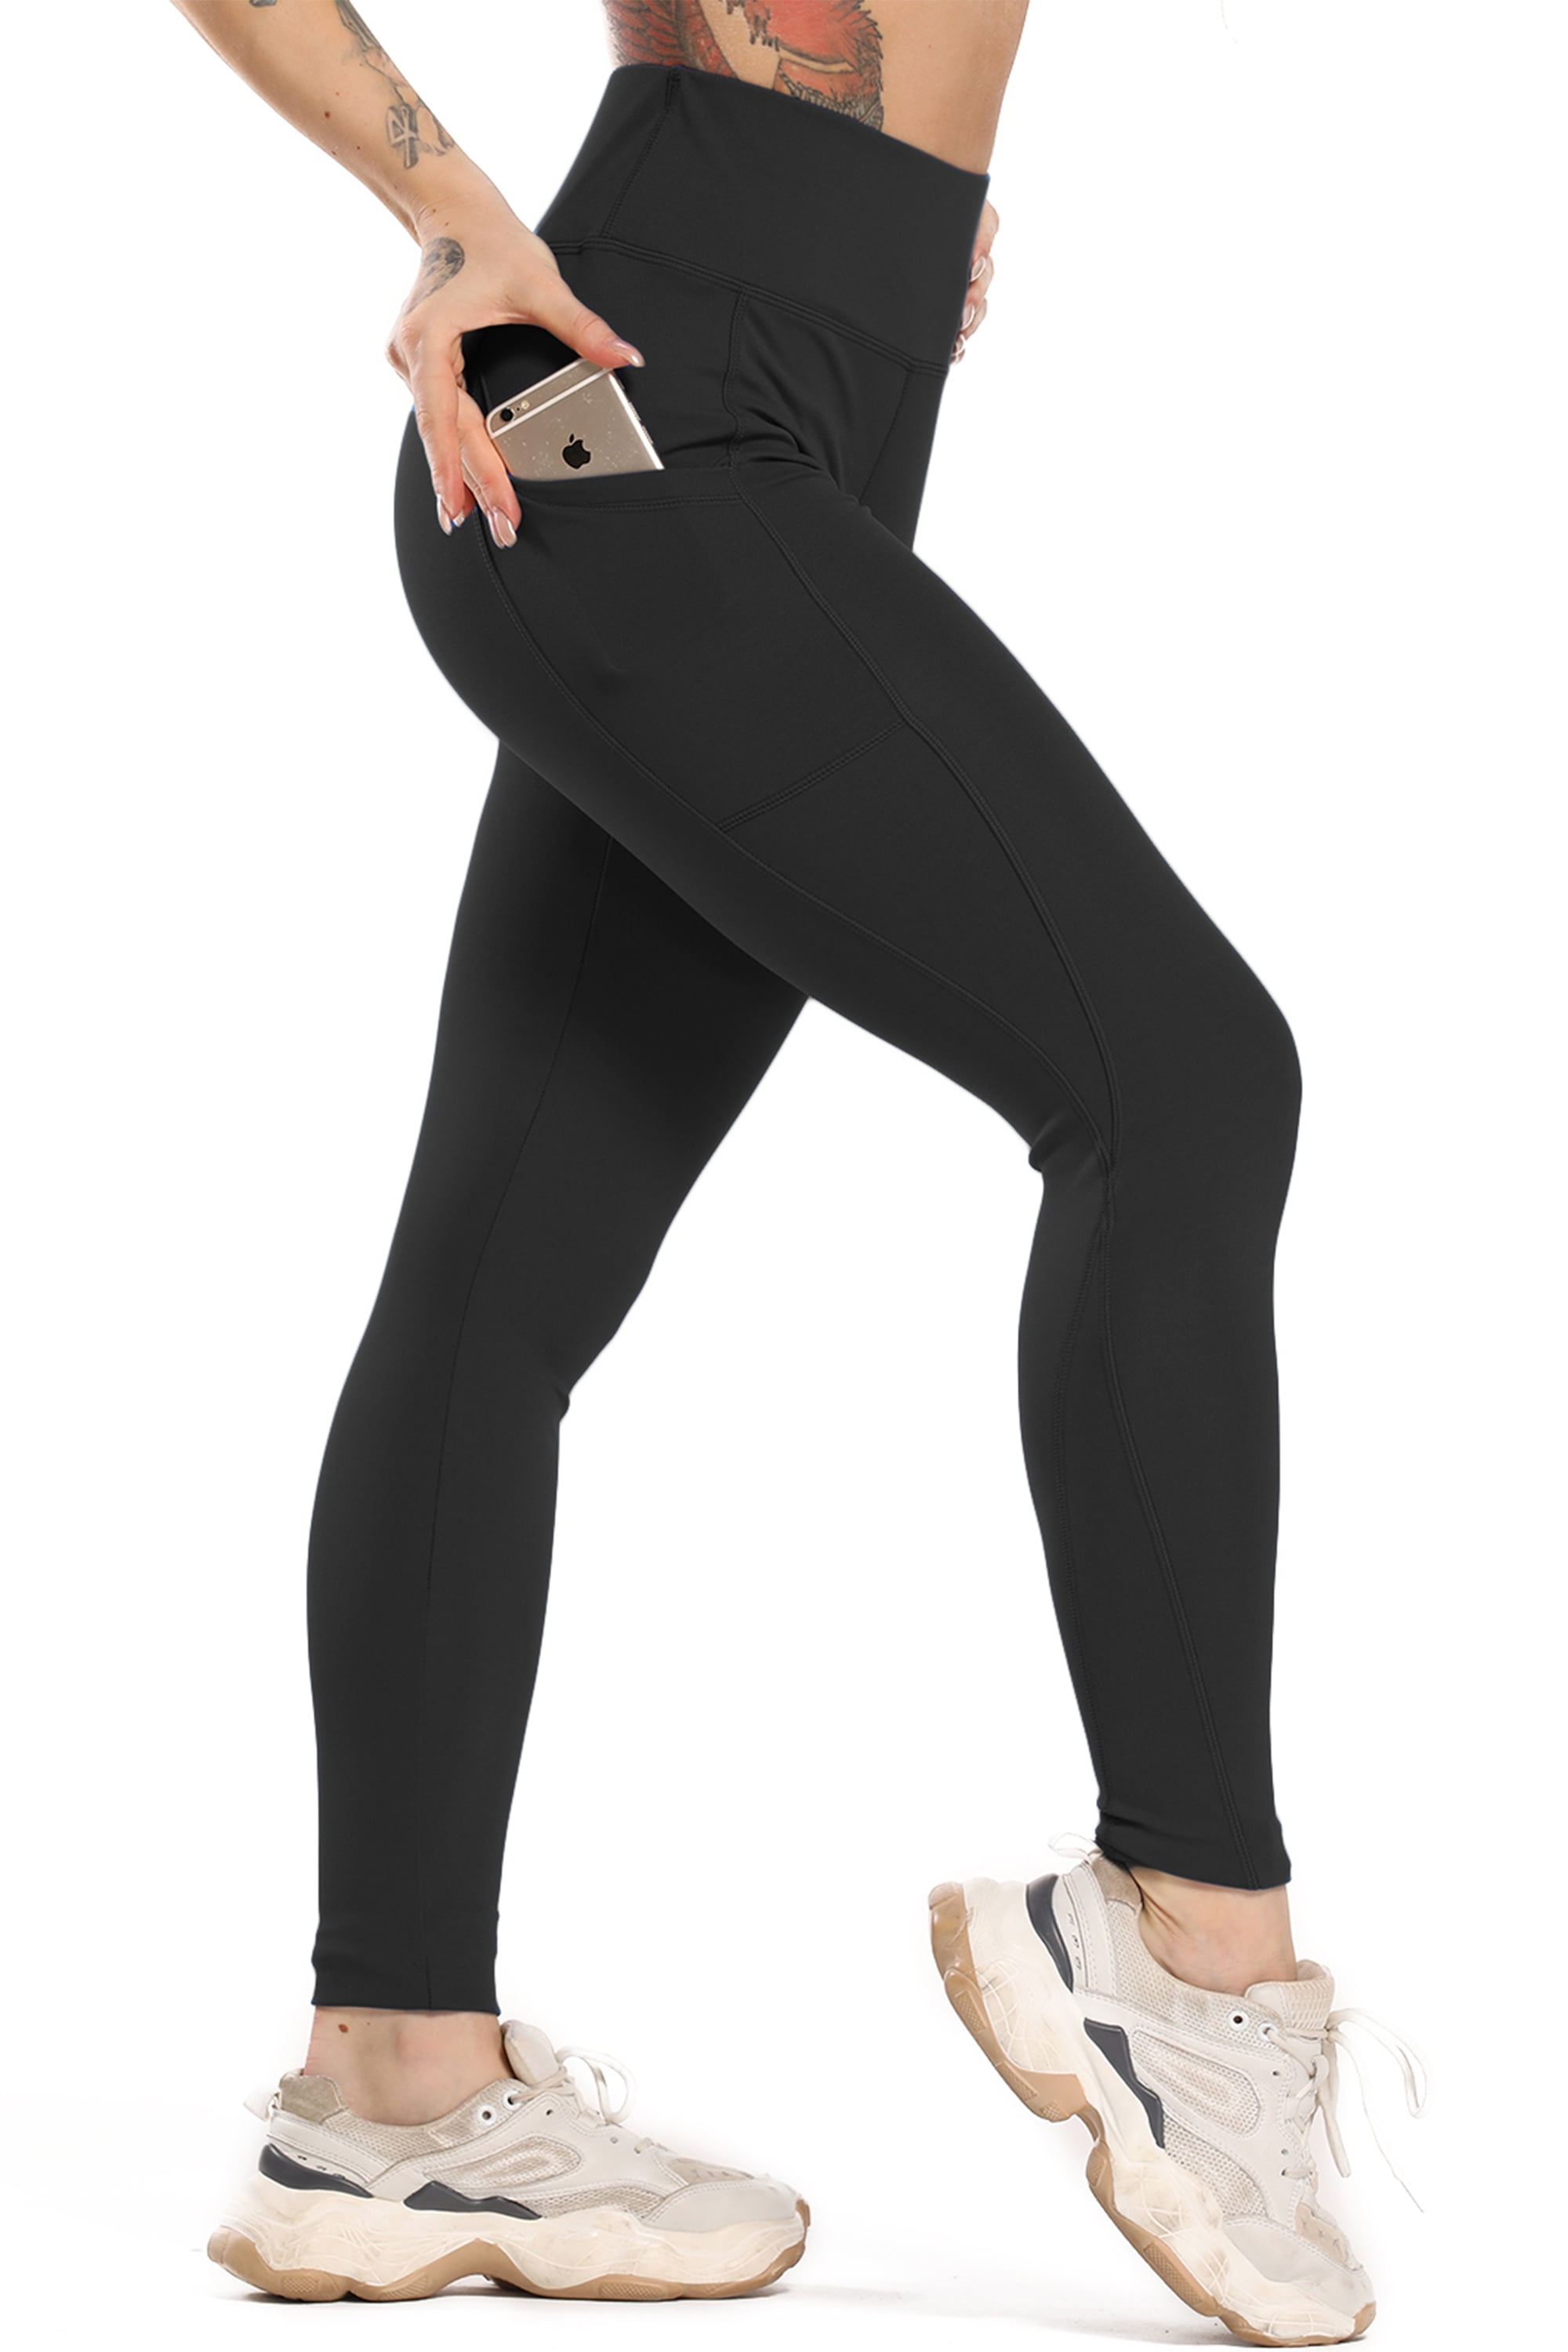 FITTOO High Waist Yoga Pants with Pockets for Women Tummy Control Yoga  Leggings 4 Way Stretch Workout Pants